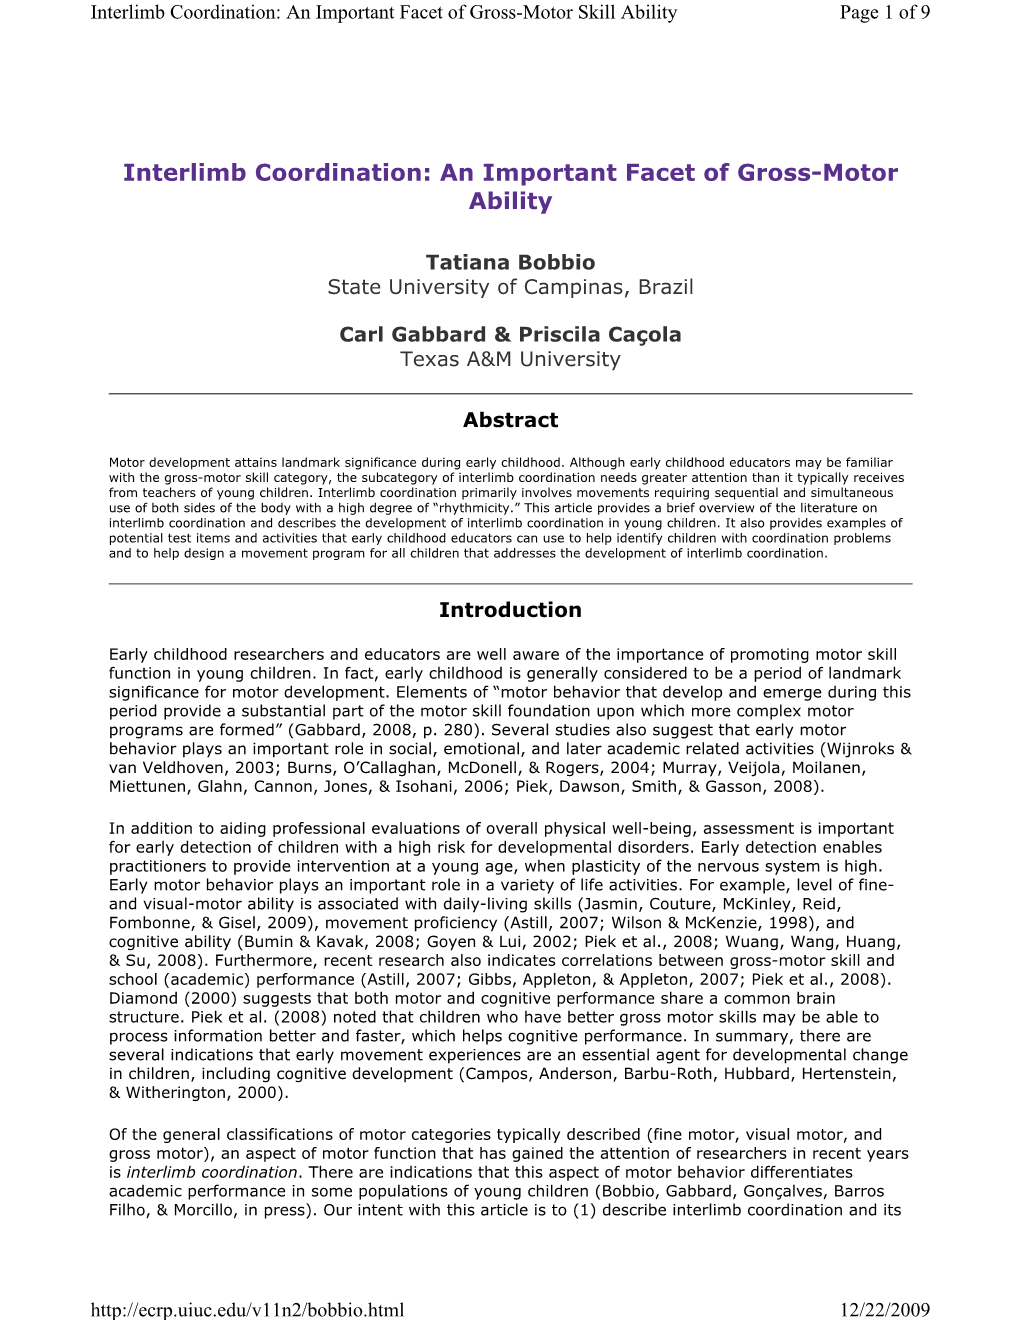 Interlimb Coordination: an Important Facet of Gross-Motor Skill Ability Page 1 of 9